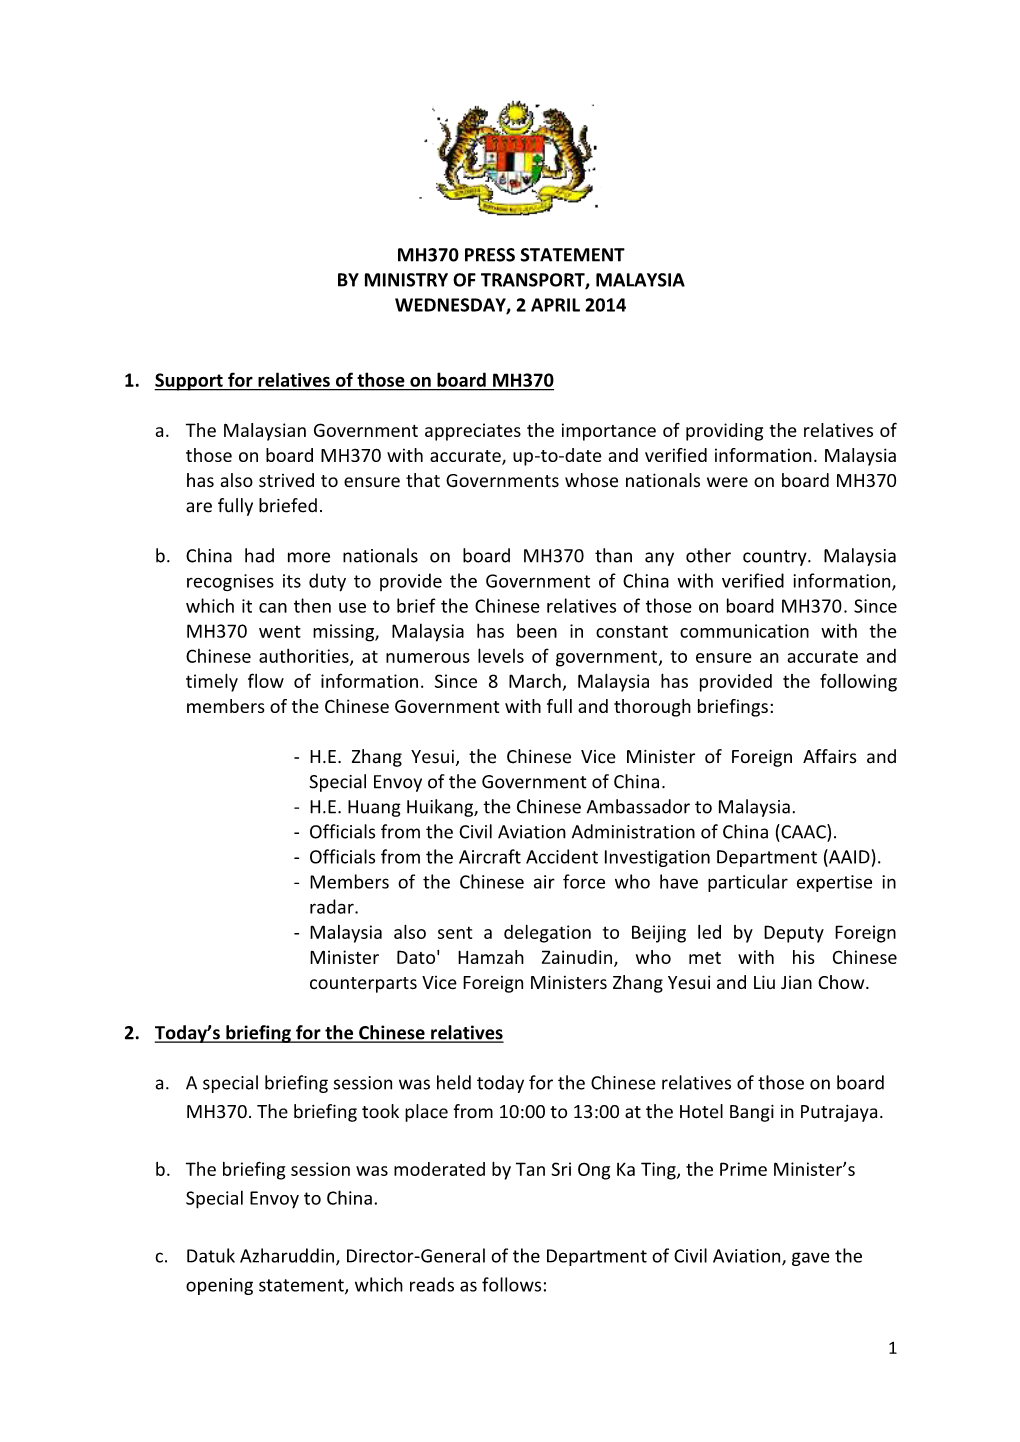 MH370 PRESS STATEMENT by MINISTRY of TRANSPORT, MALAYSIA WEDNESDAY, 2 APRIL 2014 1. Support for Relatives of Those on Board